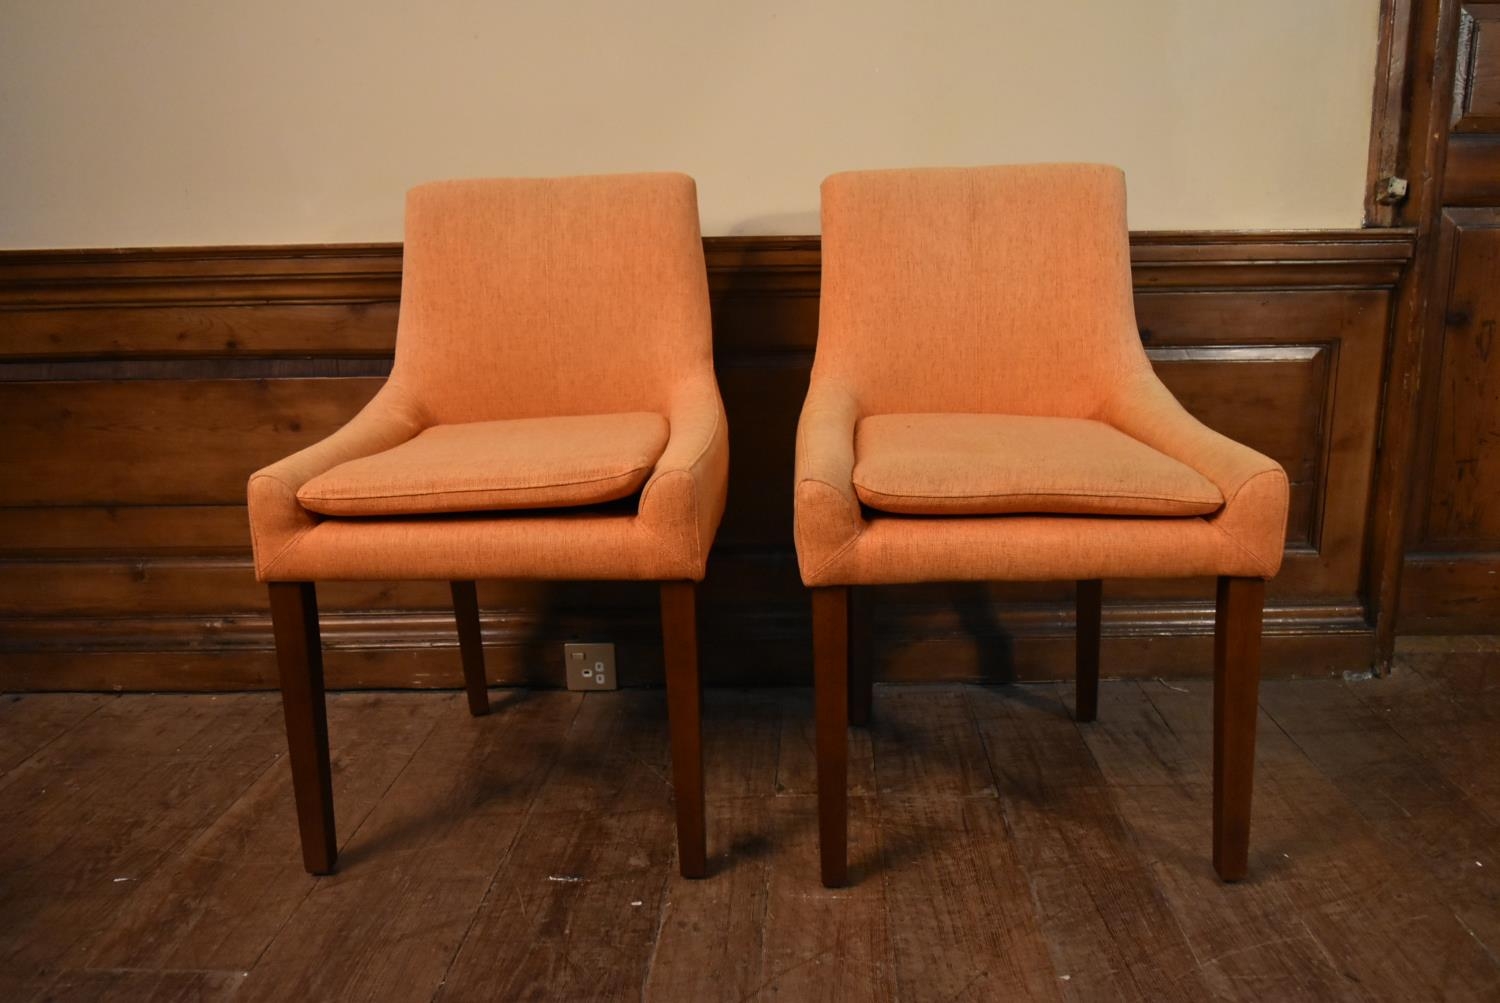 A pair of contemporary dining chairs in calico upholstery. H.85 W.53 D.45cm